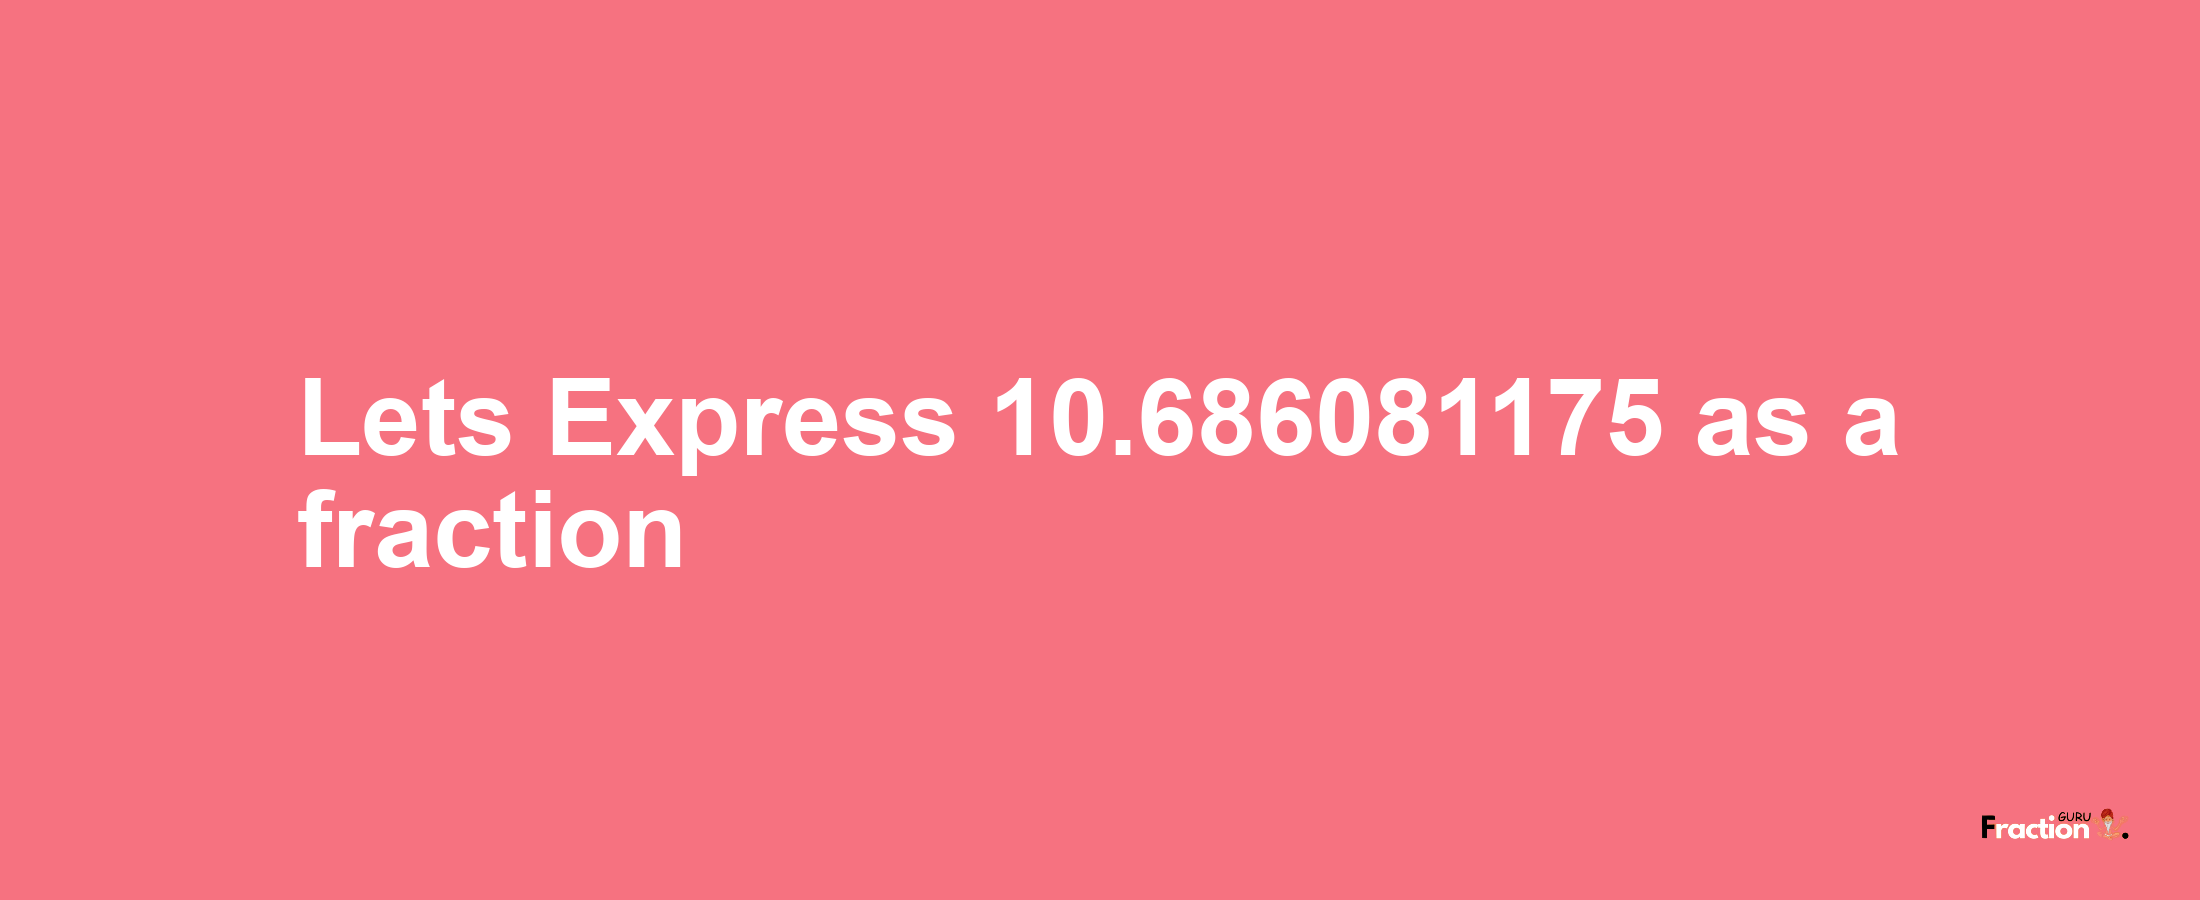 Lets Express 10.686081175 as afraction